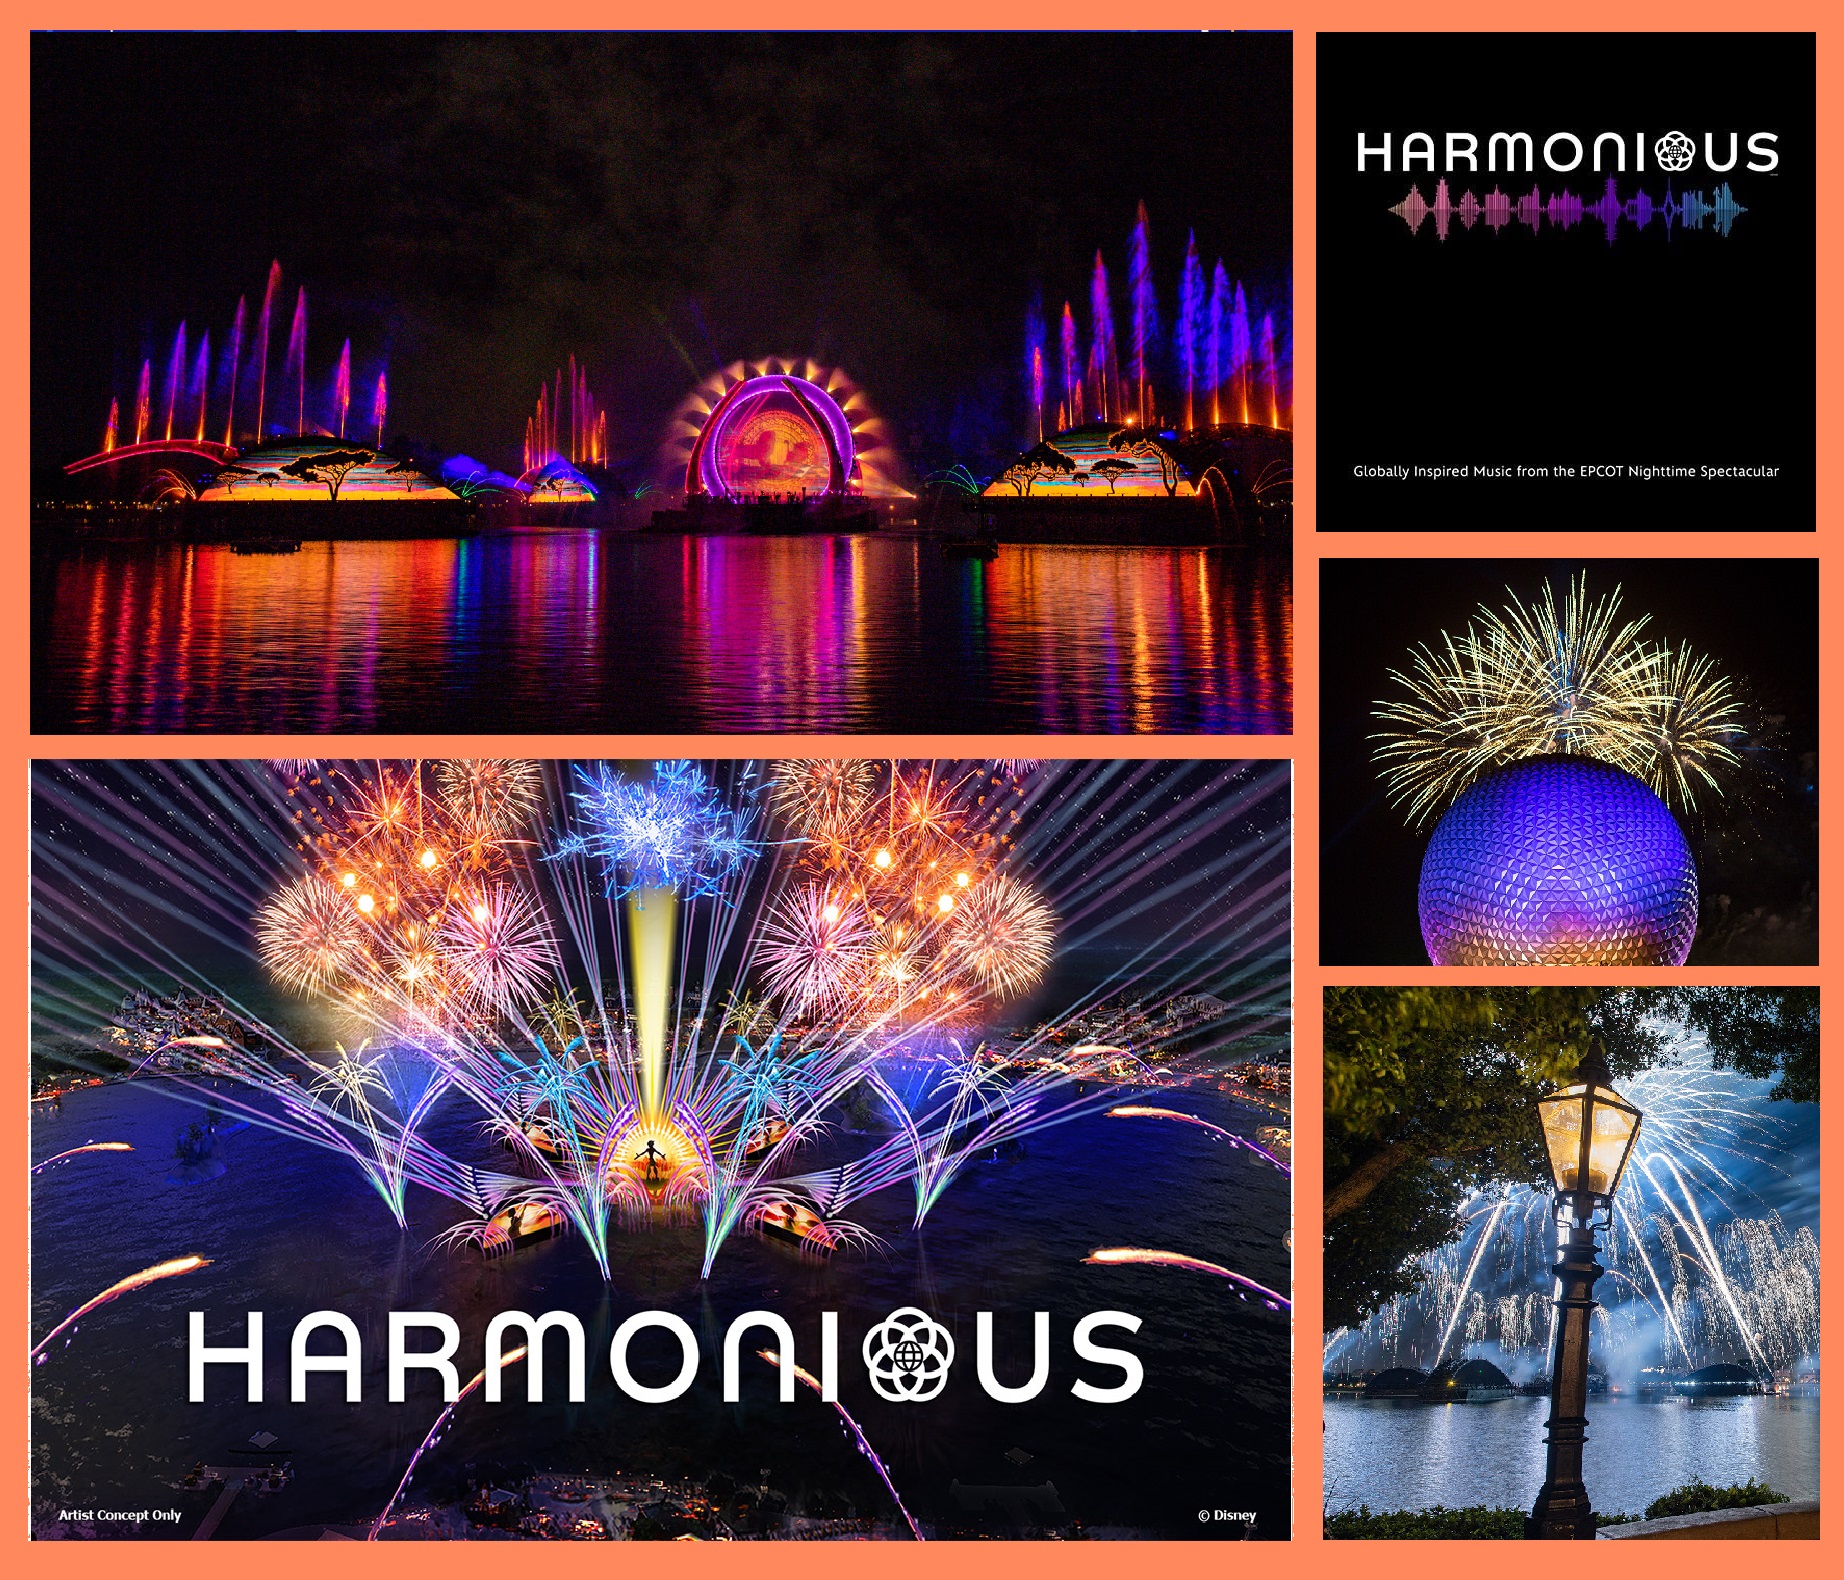 Harmonious: Globally Inspired Music from the EPCOT Nighttime Spectacular